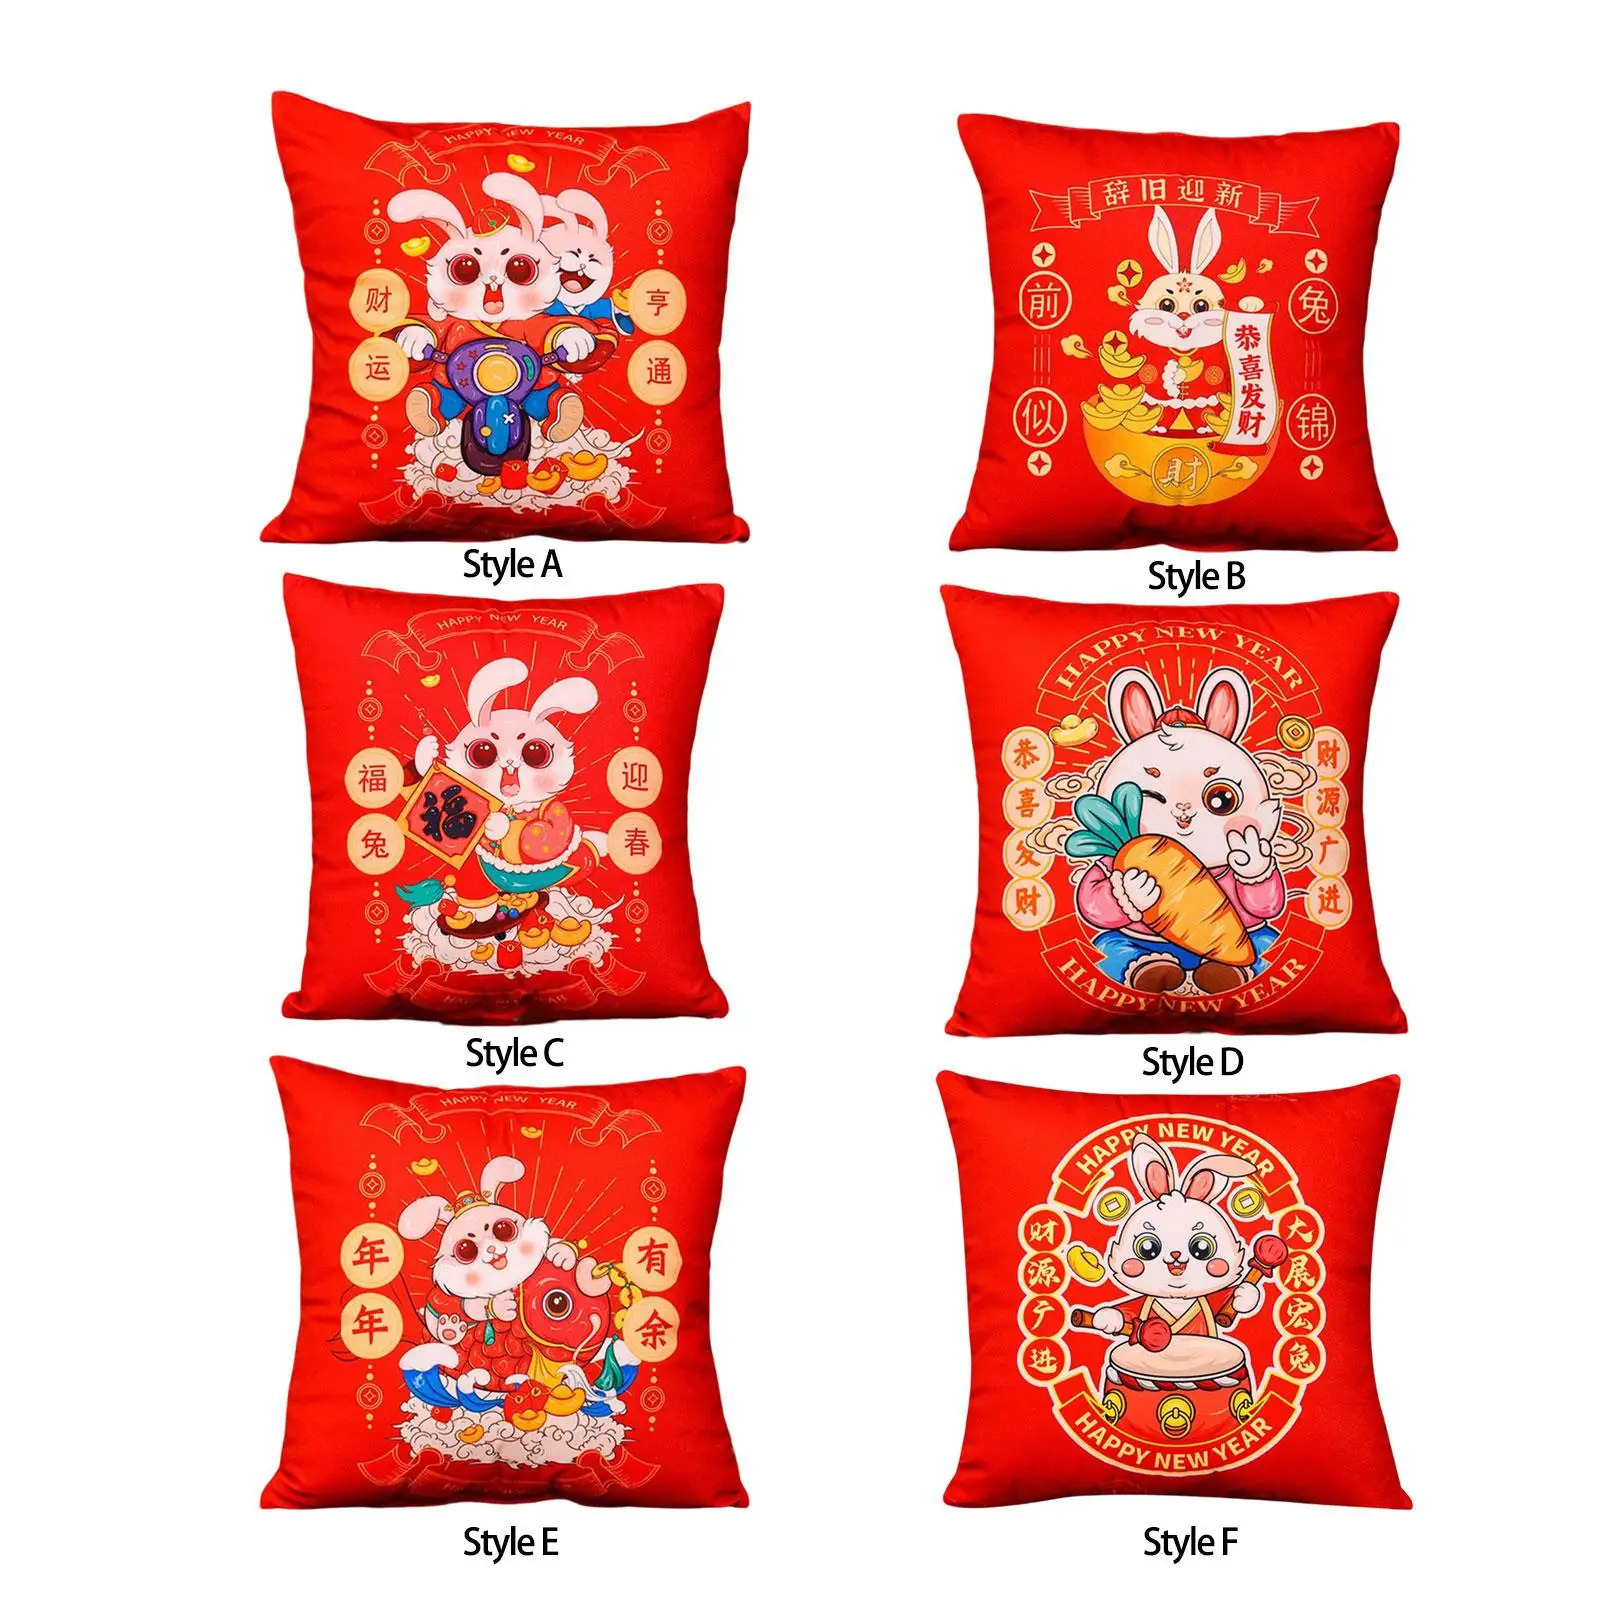 Sping Festival Sofa Pillow Home Decor with Pillow Inserts Breathable Decorative 40cm Cushion for Bedroom Chair Patio Office Bed